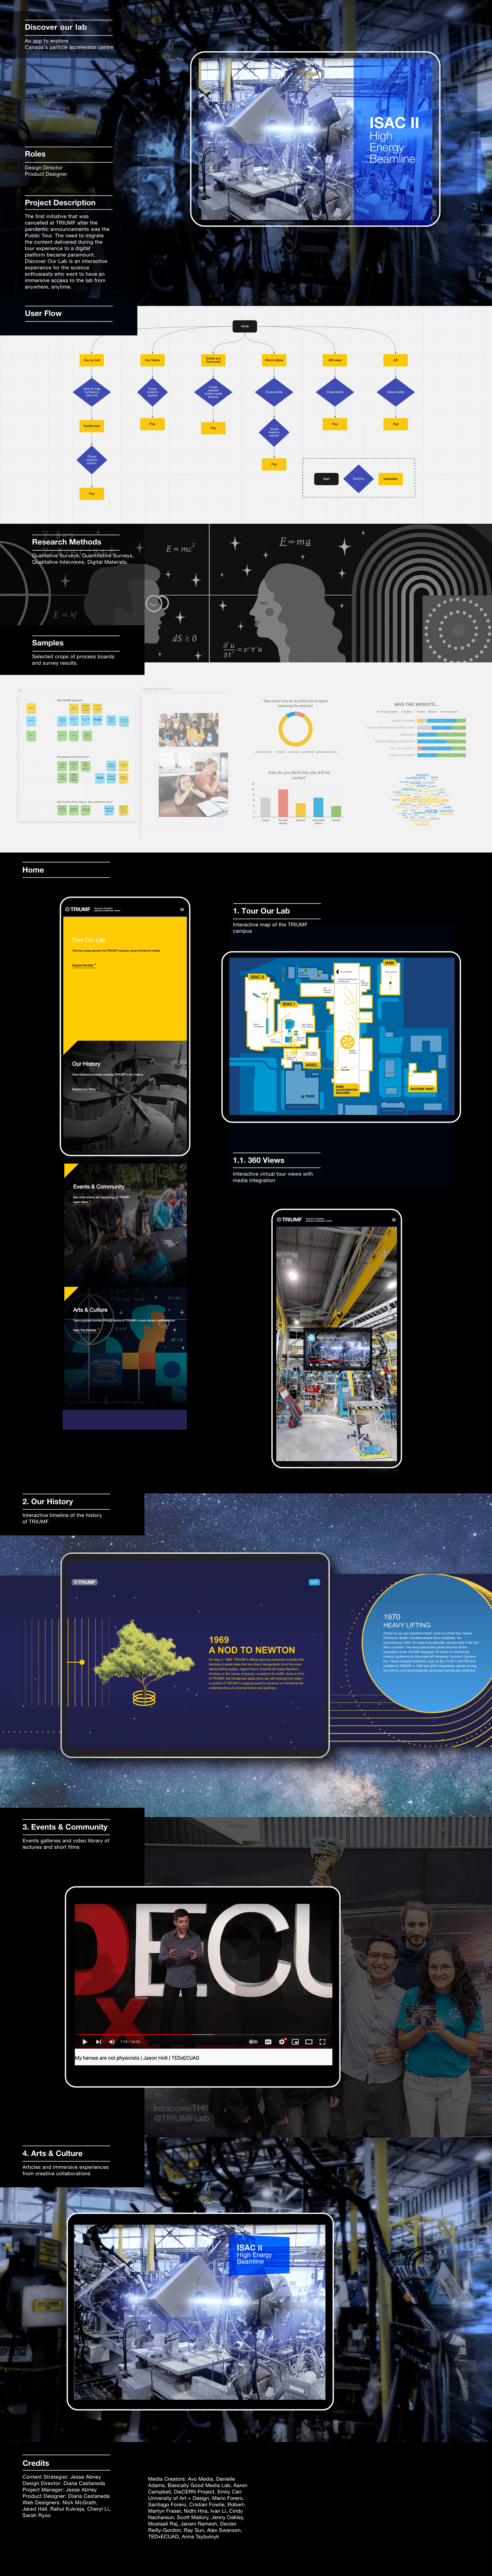 app design matterport mobile UI/UX ux Web Design  augmented reality Interaction design  product design  Virtual reality